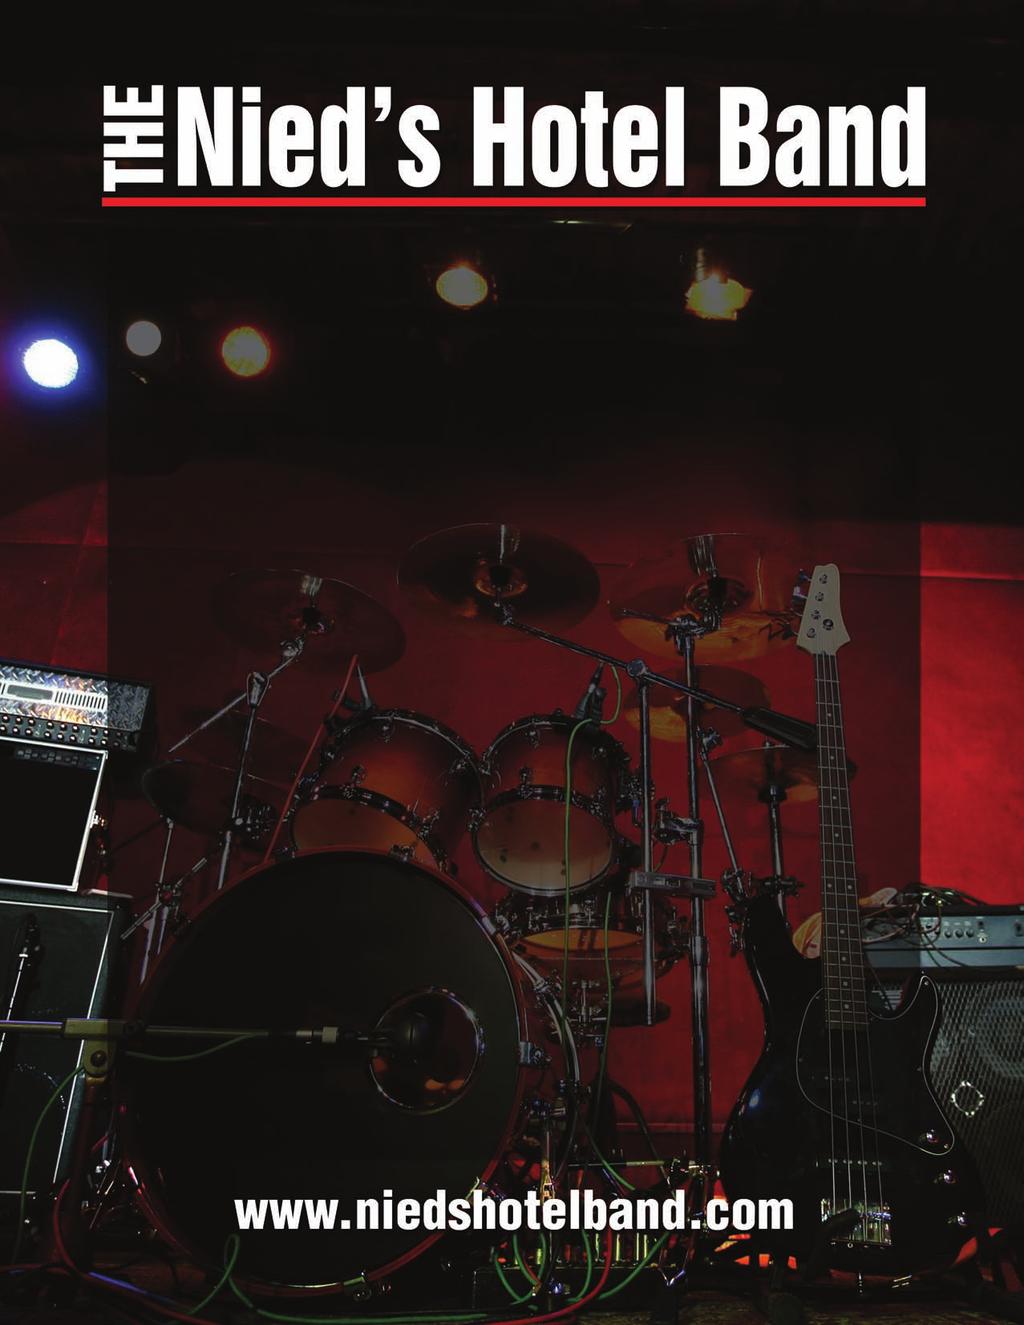 The Nied s Hotel Band could be called The E Street Band of Pittsburgh Margaret Welsh/Pittsburgh City Paper The Nied s Hotel Band, voted Pittsburgh s Best Bar Band in the 2016 Pittsburgh Magazine